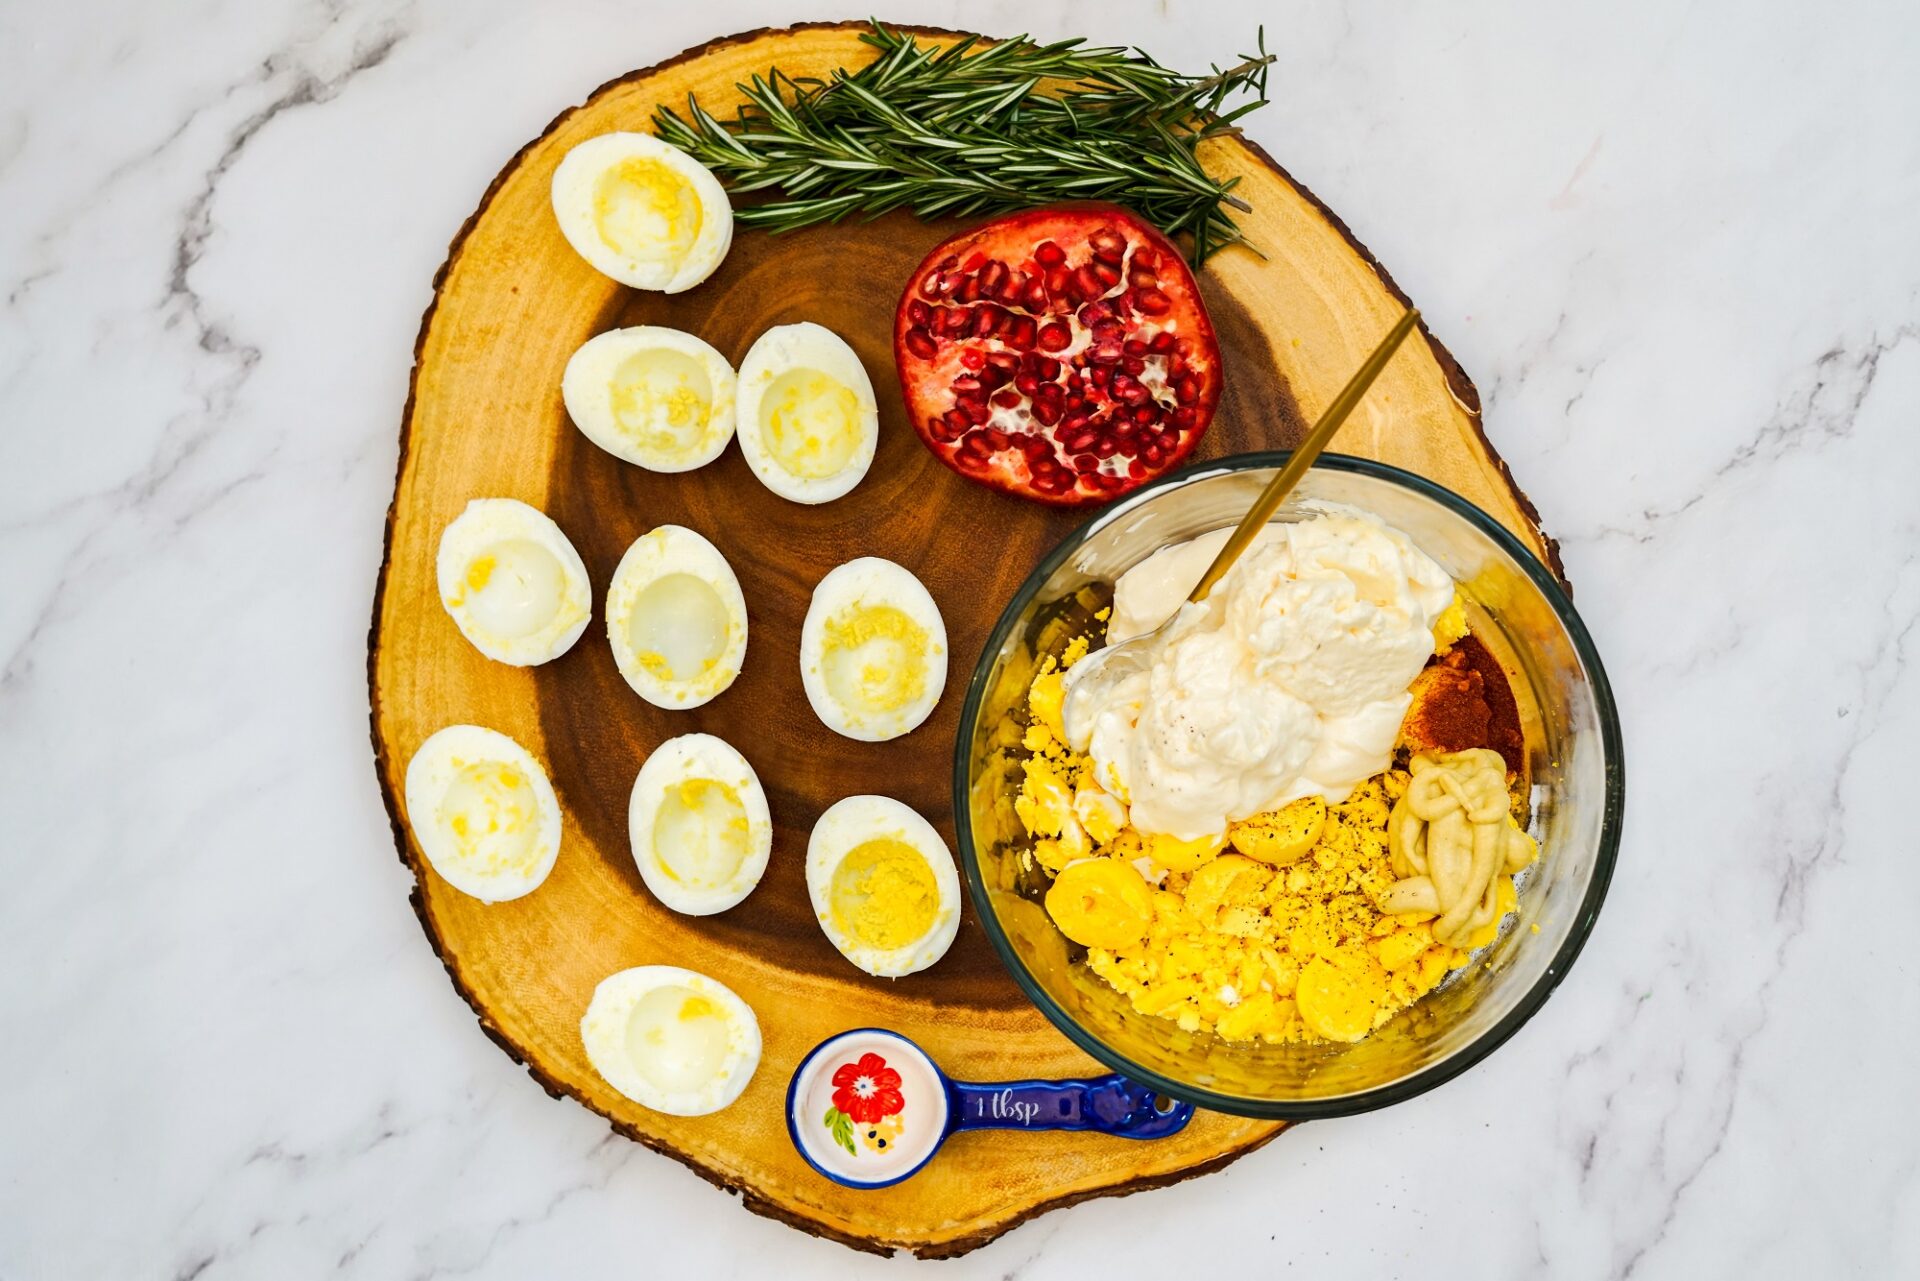 Empty egg whites arranged next to a bowl of deviled egg ingredients.